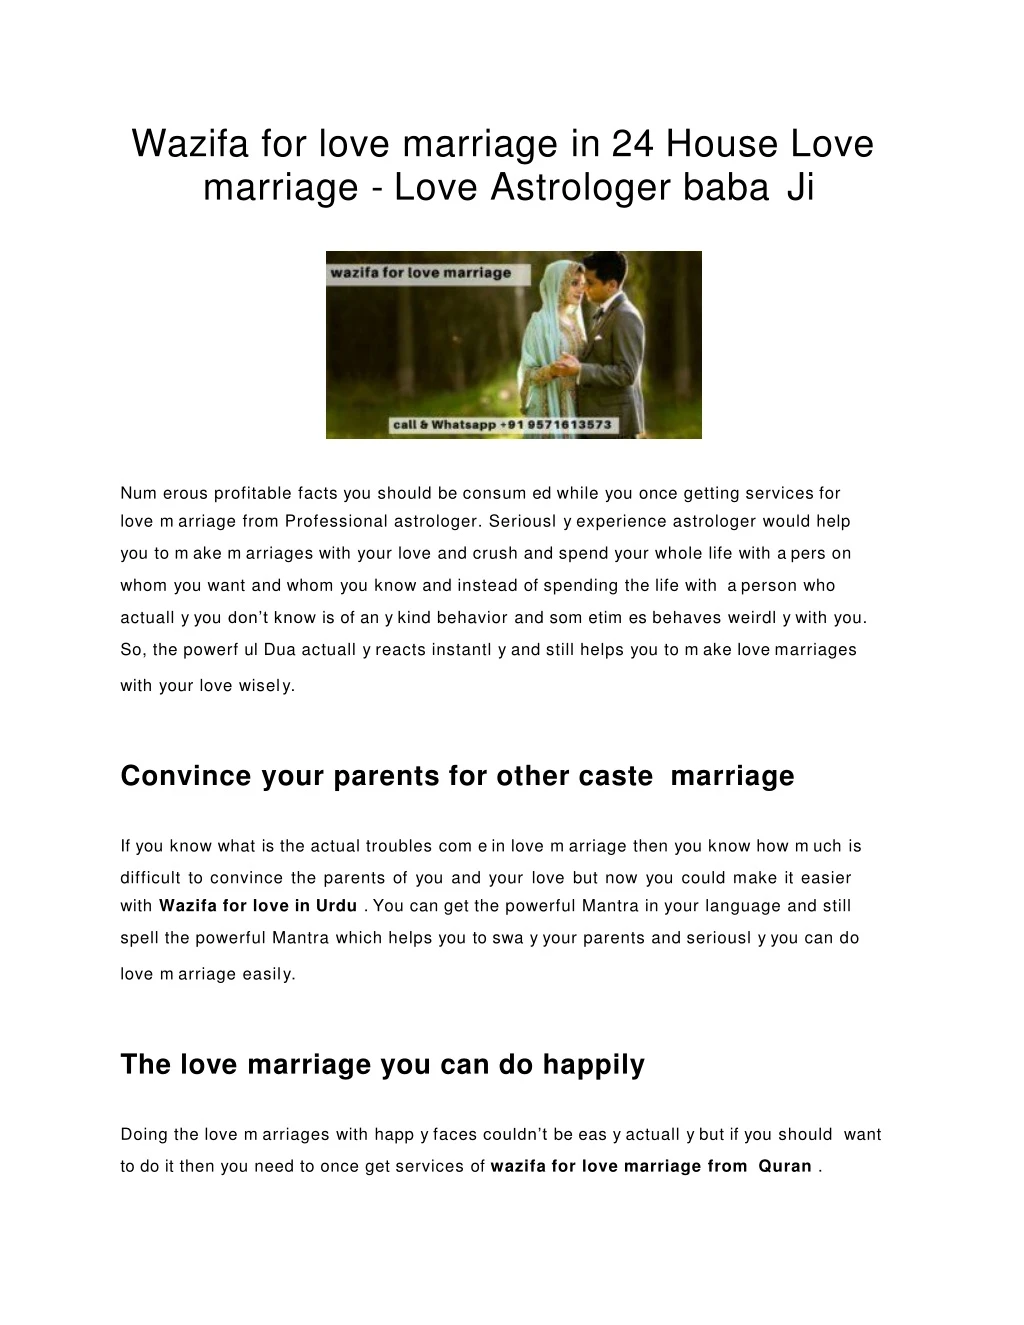 wazifa for love marriage in 24 house love marriage love astrologer baba ji